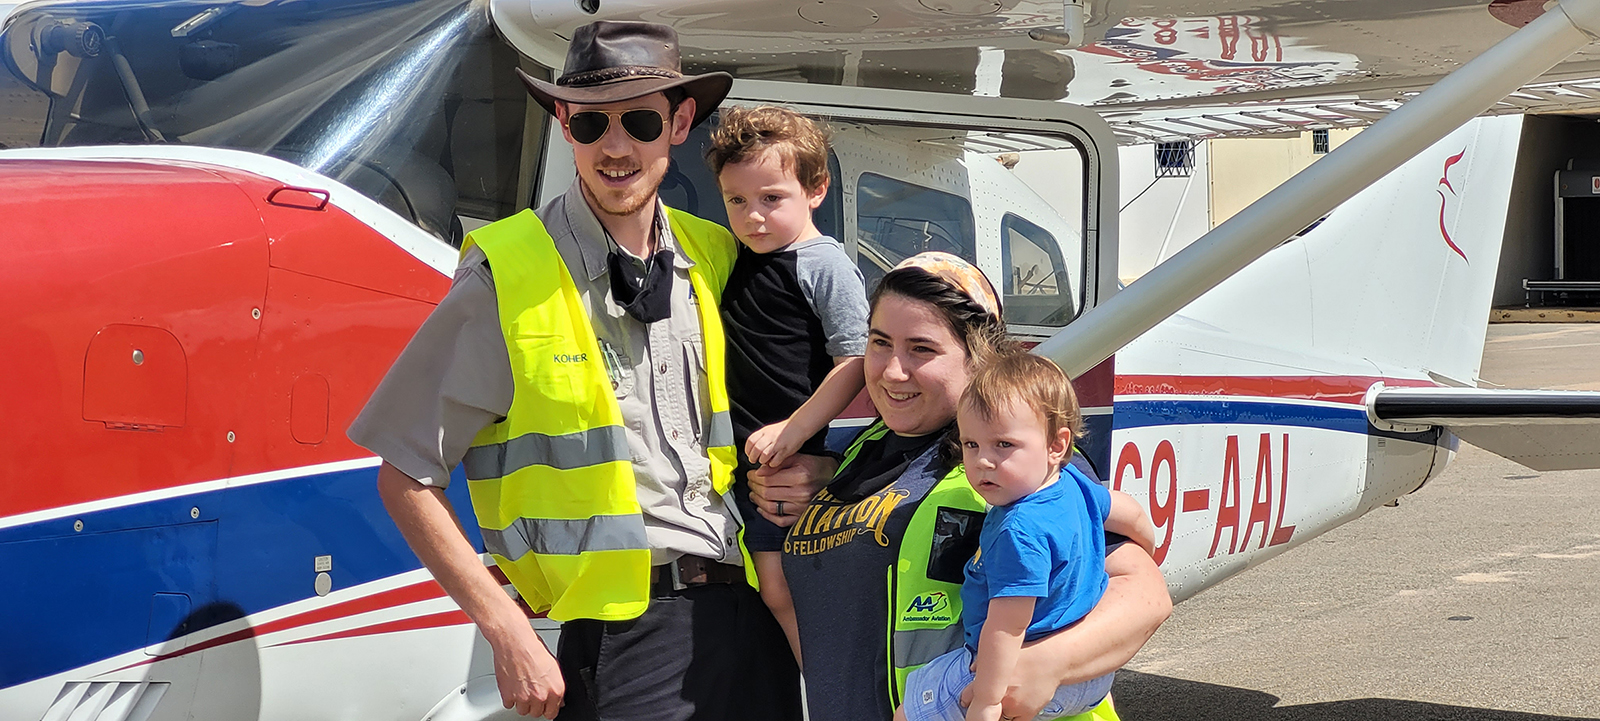 Missionary pilot Ryan Koher with his wife, Annabel, and their sons in April 2022. Ryan Koher has been detained in Mozambique since early November. Photo courtesy of Mission Aviation Fellowship